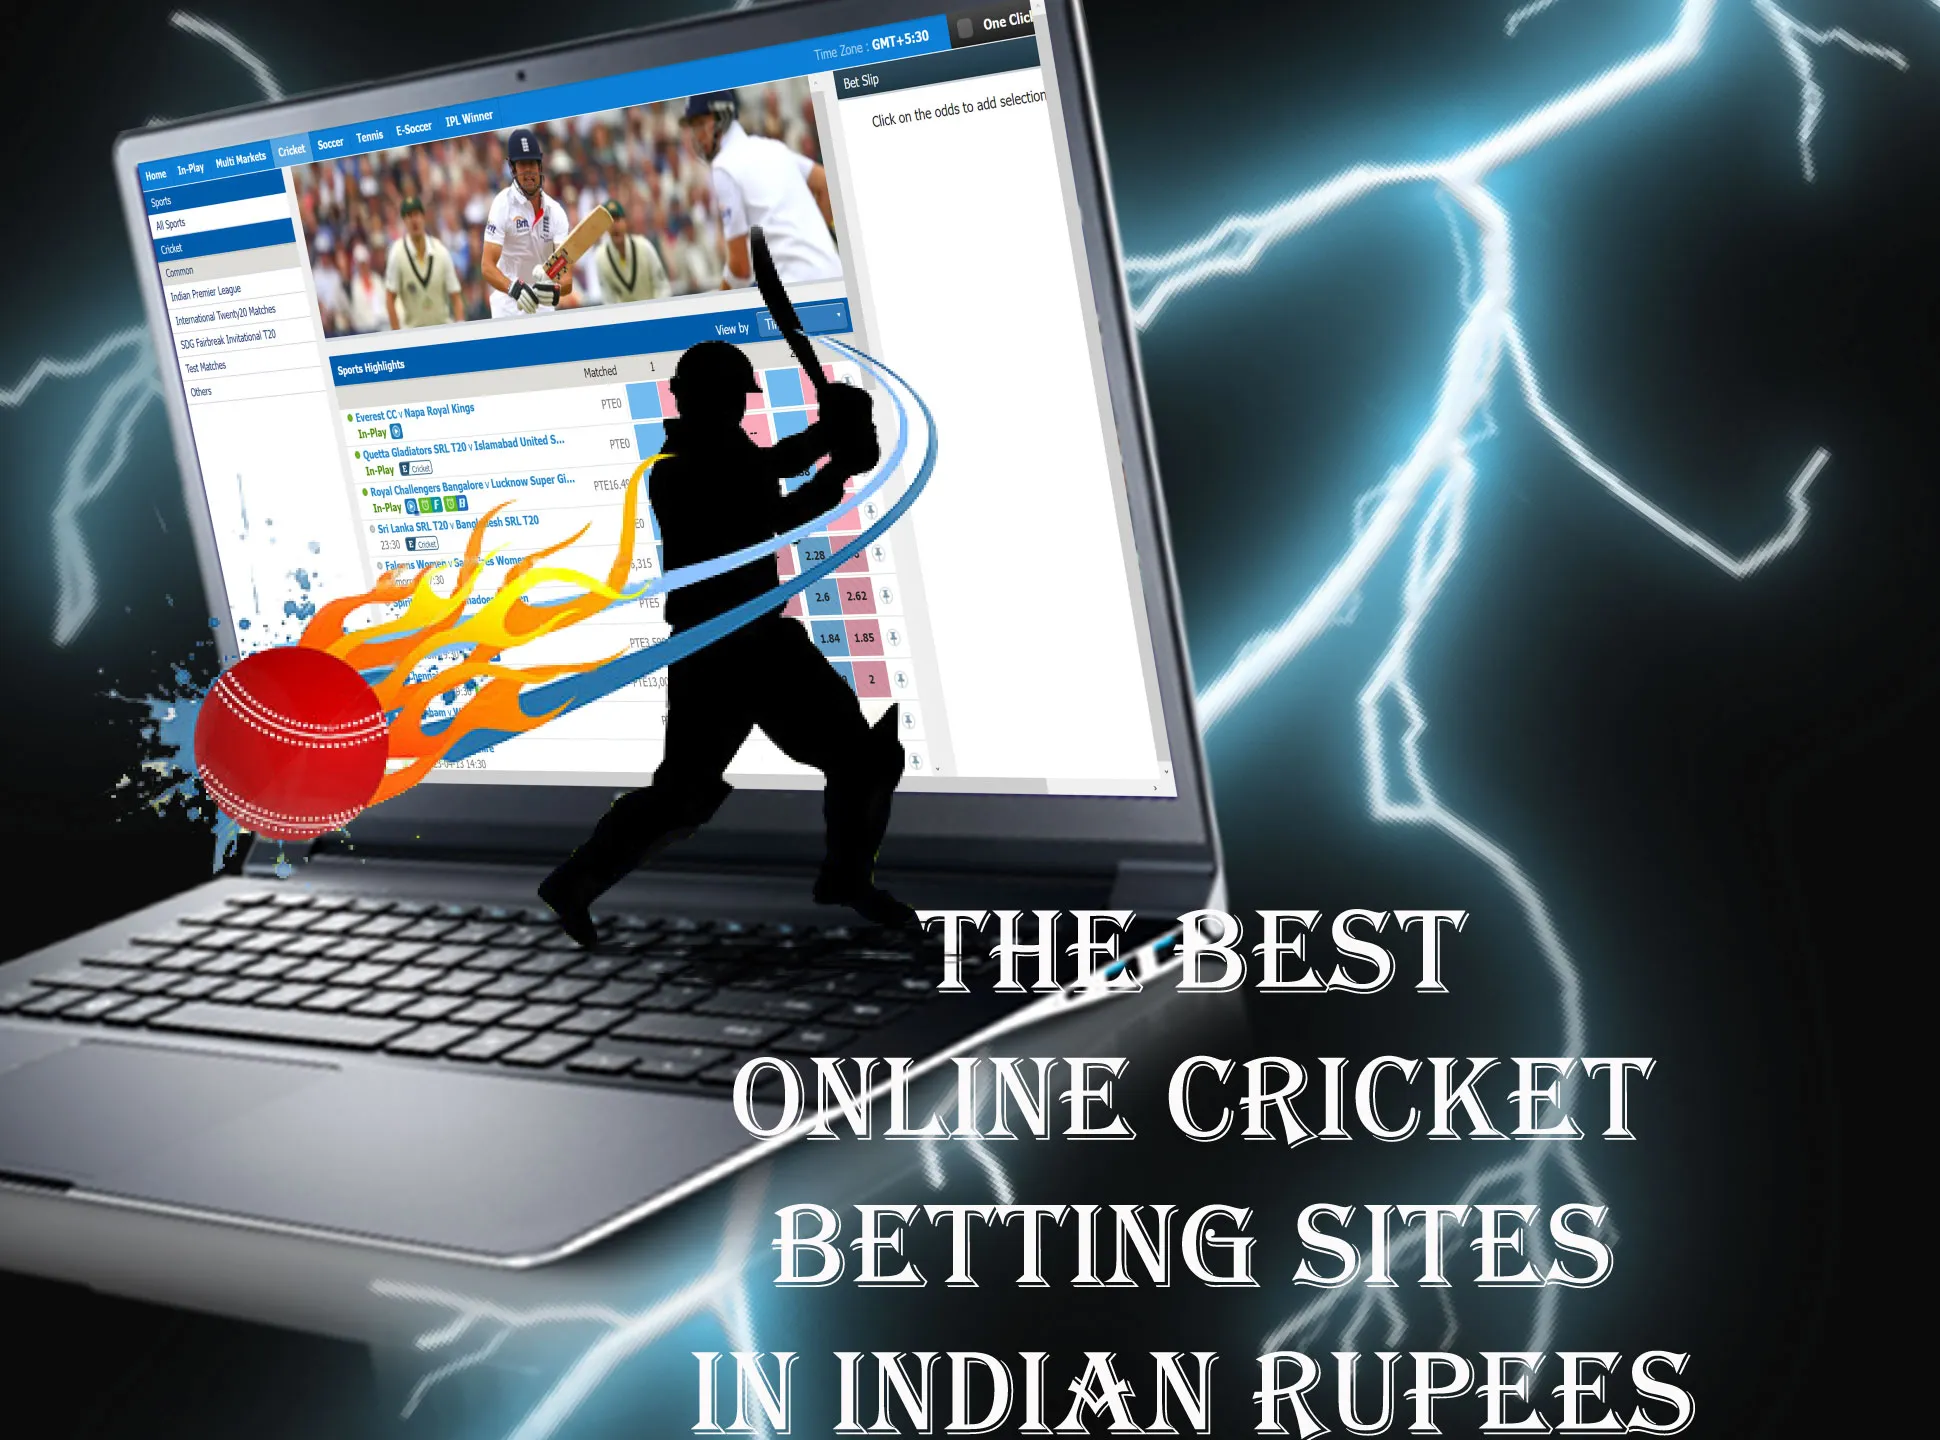 These betting companies offer depositing and withdrawing funds in Indian rupees.